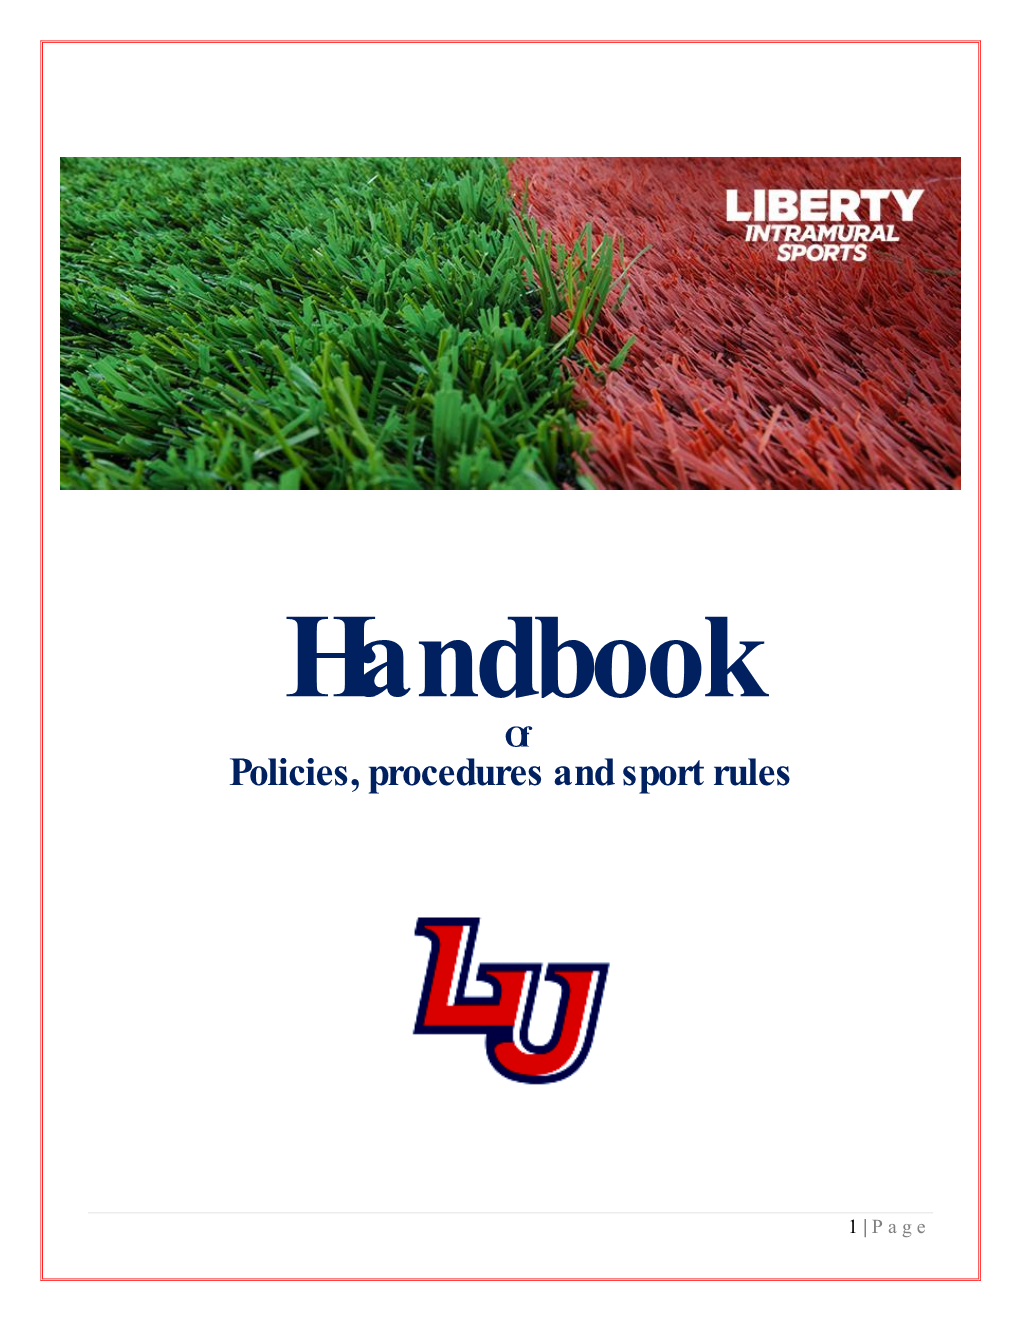 Policies, Procedures and Sport Rules